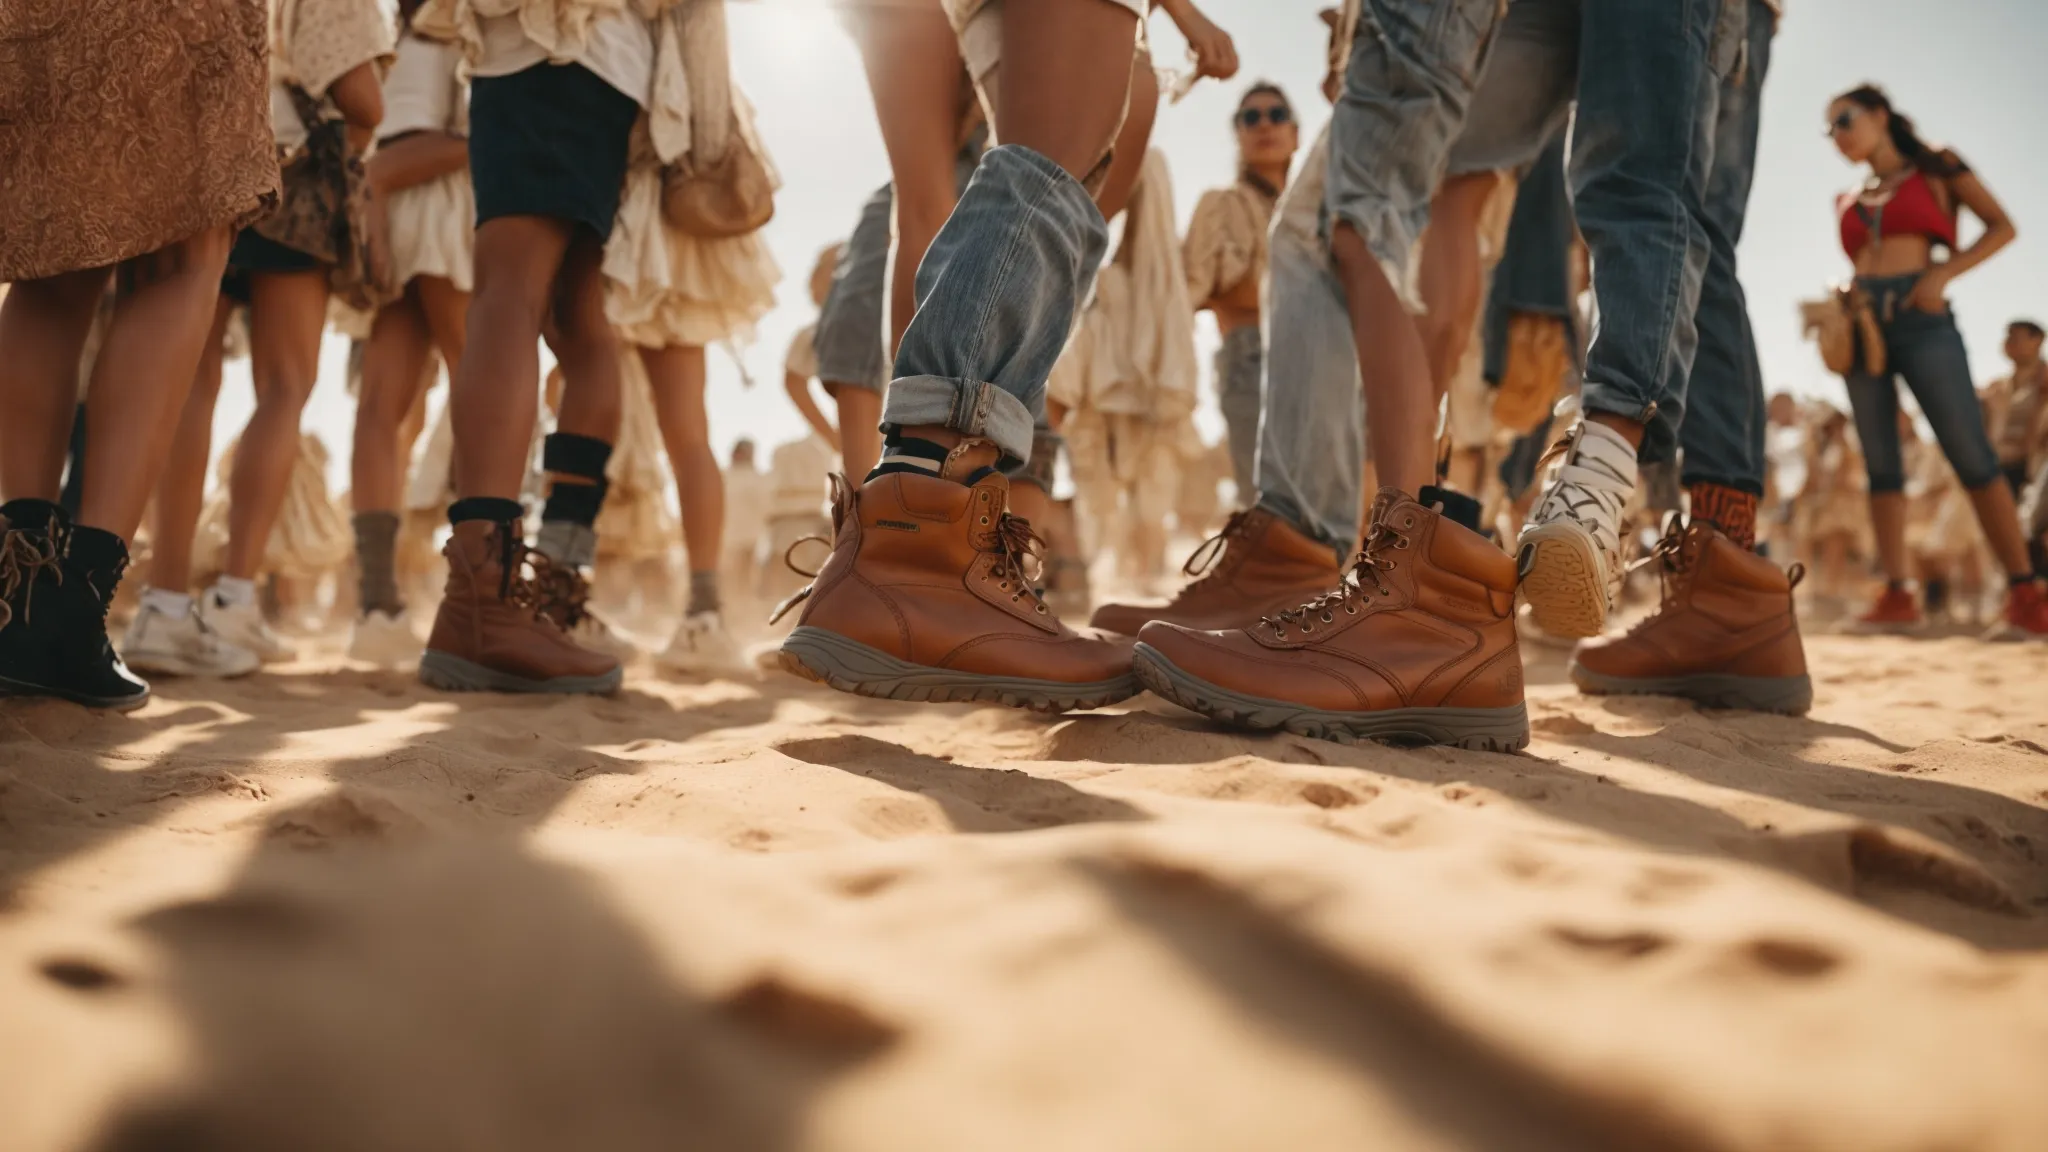 a vibrant crowd of festival-goers dances under the desert sun, showcasing an eclectic mix of uniquely styled sneakers and boots.